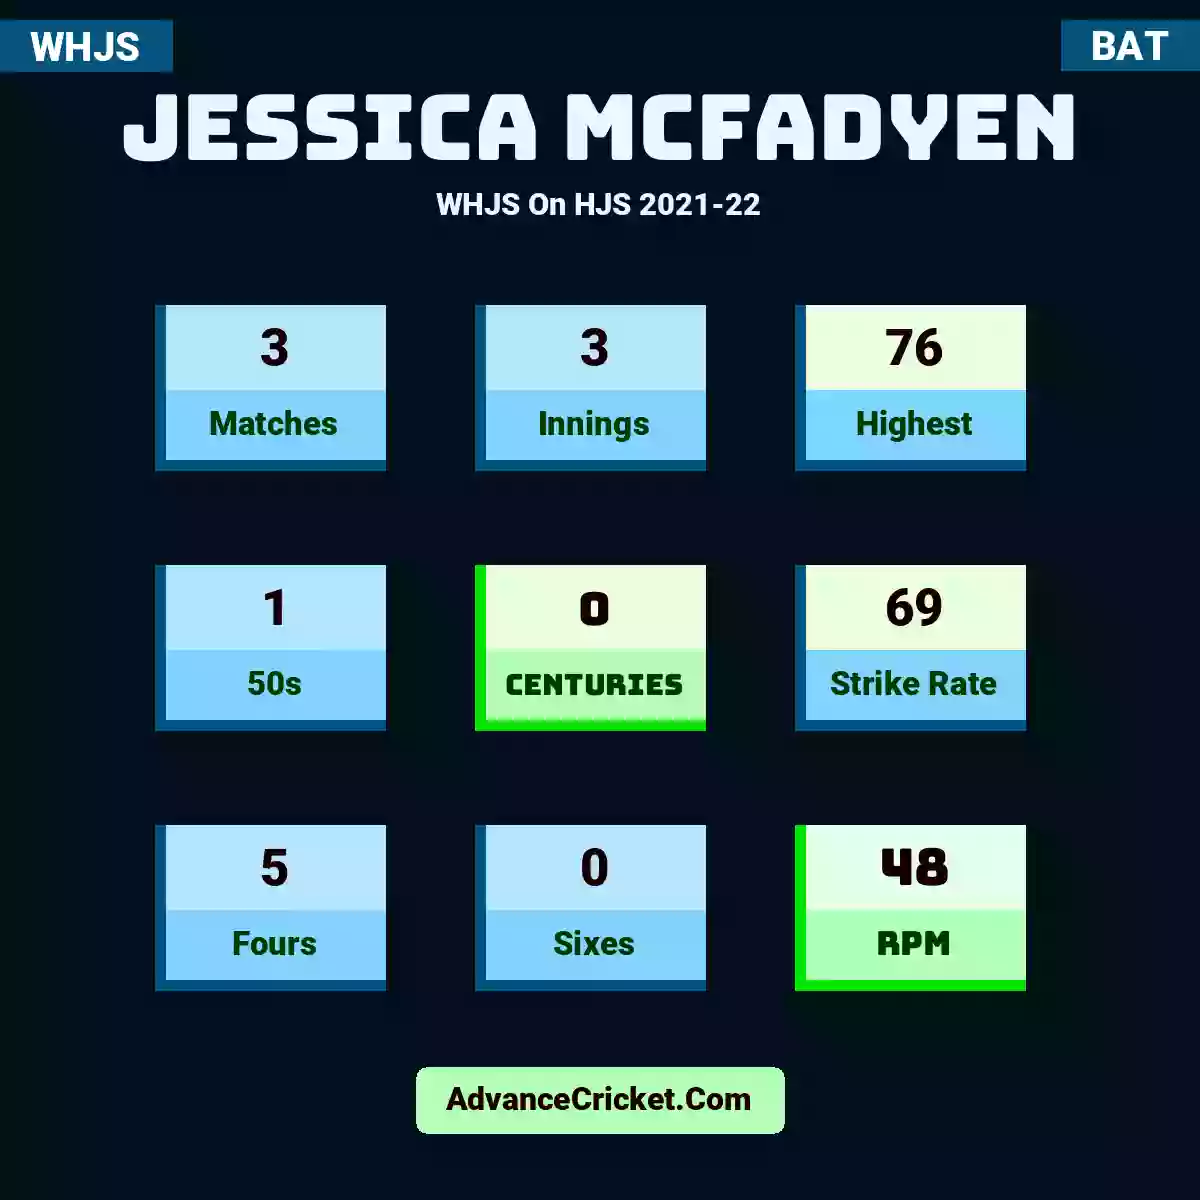 Jessica McFadyen WHJS  On HJS 2021-22, Jessica McFadyen played 3 matches, scored 76 runs as highest, 1 half-centuries, and 0 centuries, with a strike rate of 69. J.McFadyen hit 5 fours and 0 sixes, with an RPM of 48.